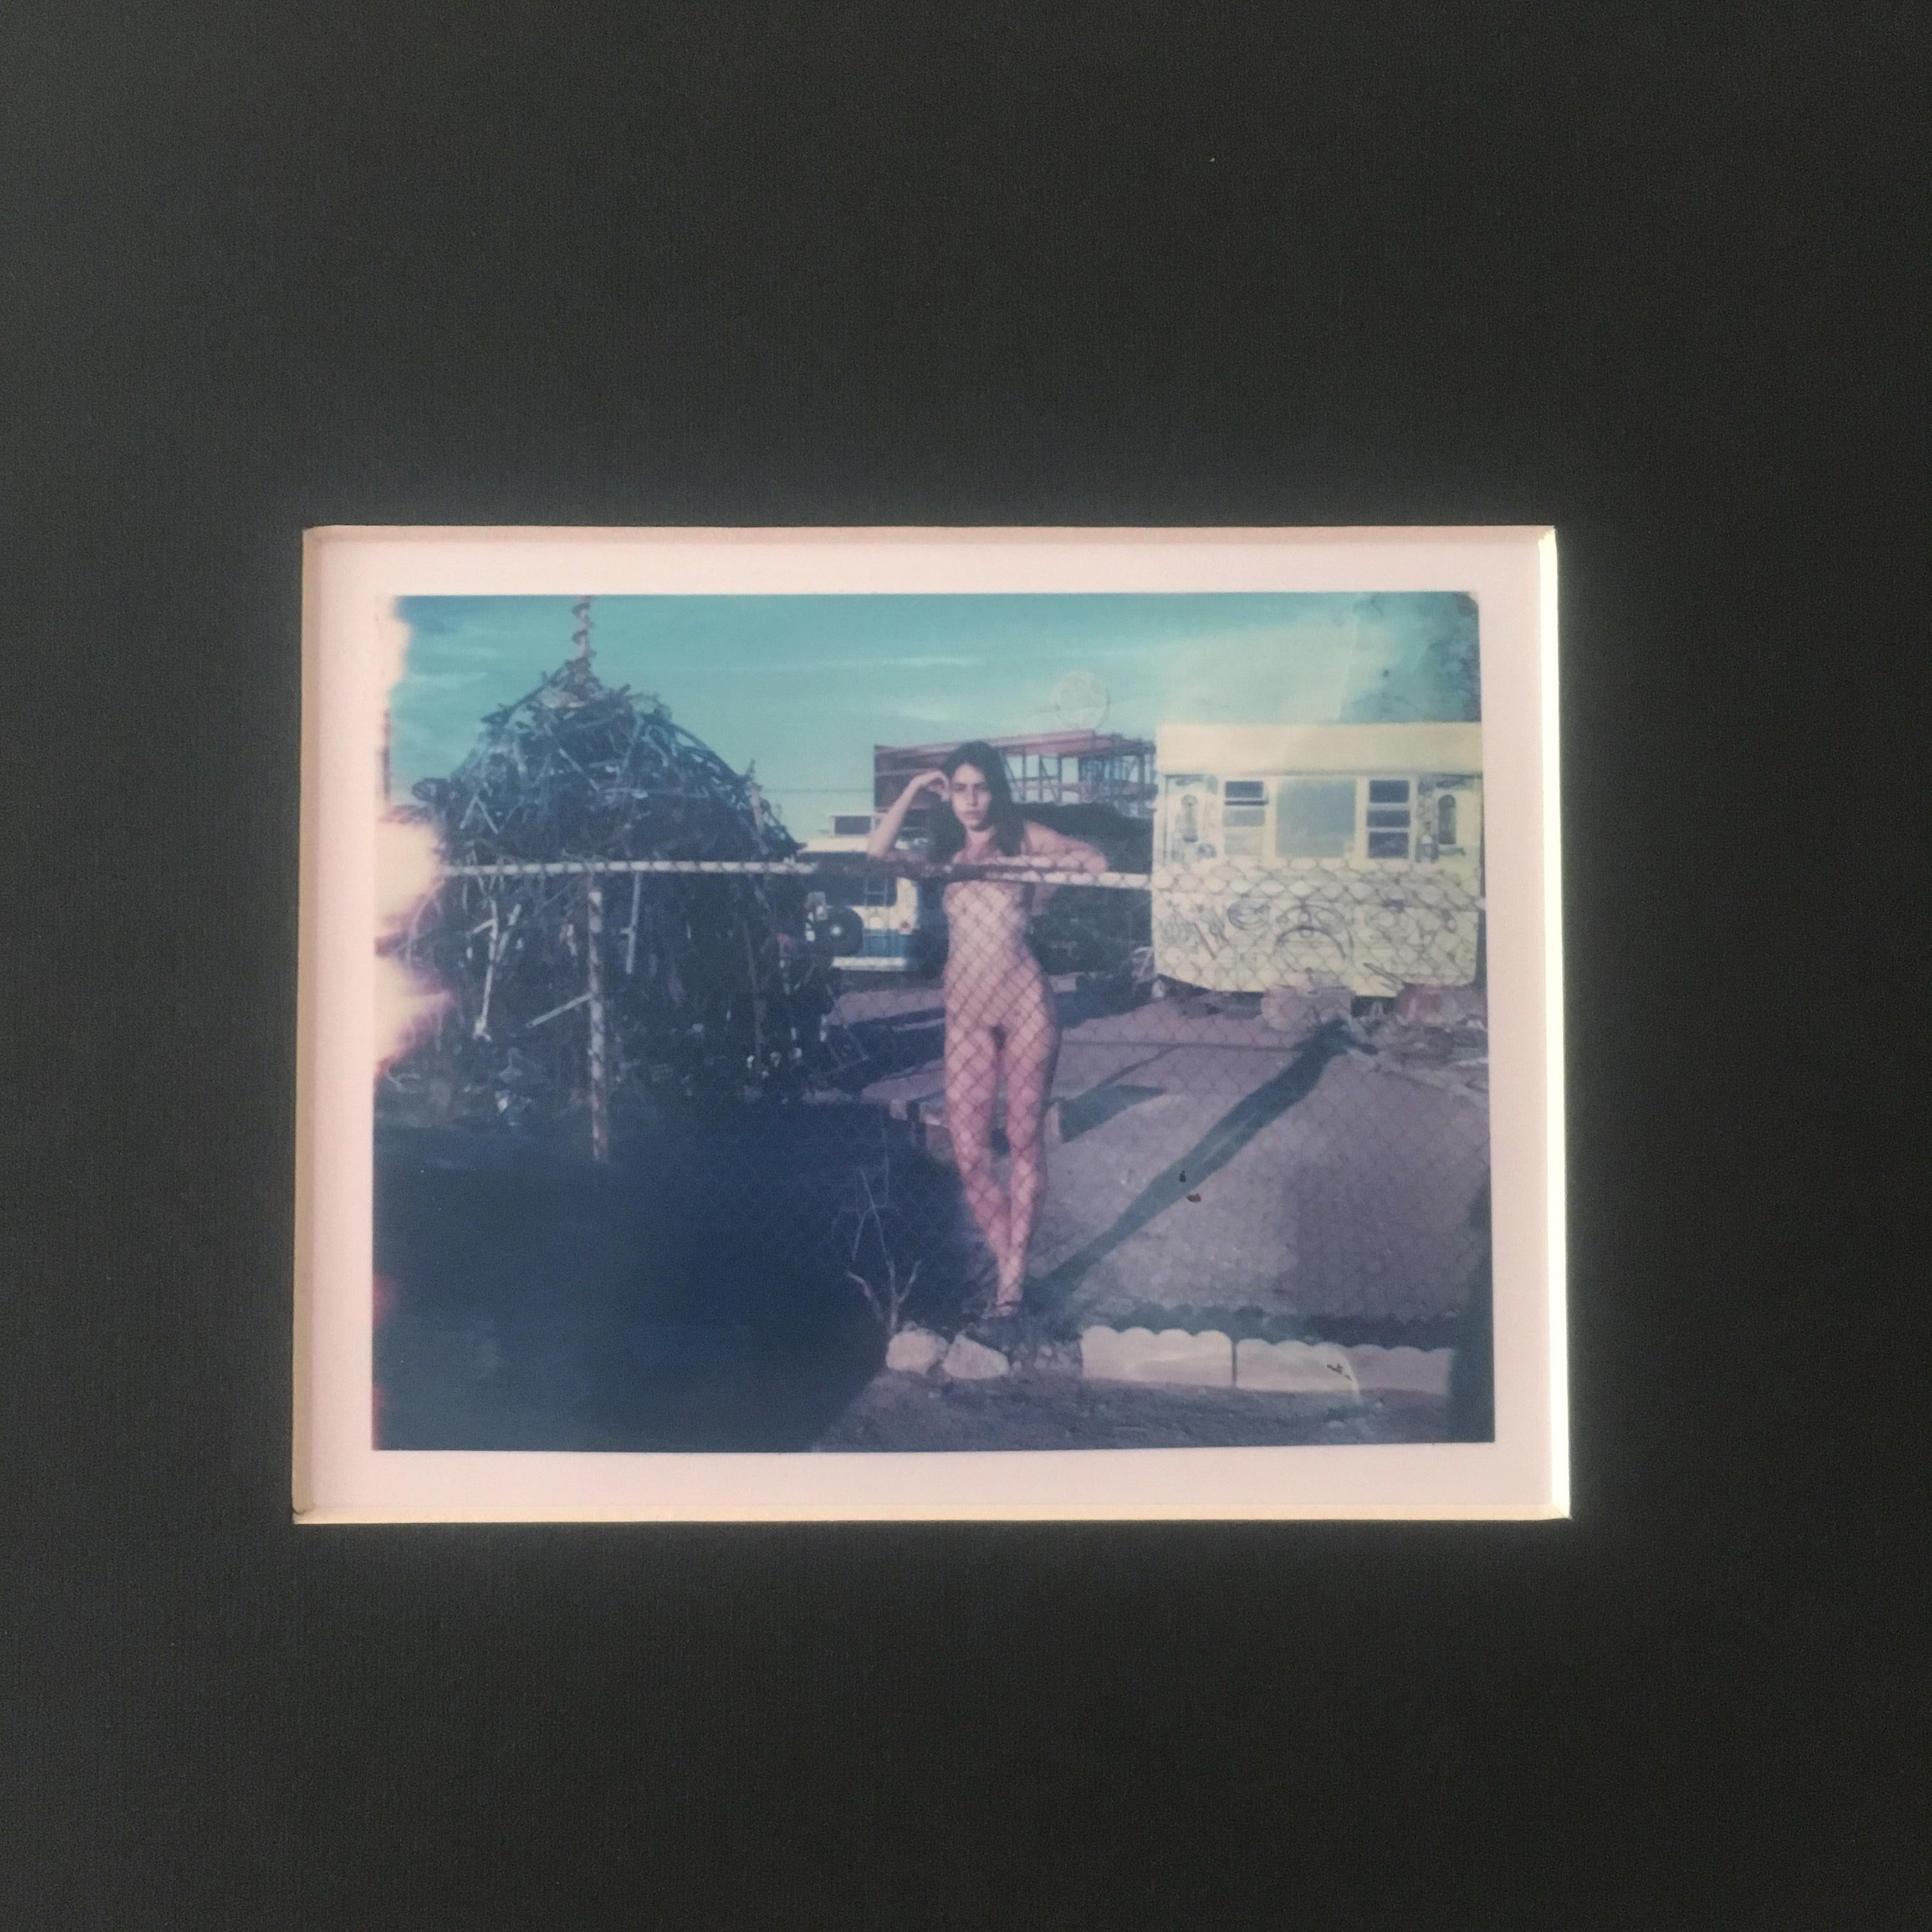 Don't fence me in (Bombay Beach) - 2019, 

Polaroid Original - Unique Piece, 10.8 × 8.3 cm
Framed. Frame size: 27,2cm wide by 22,2cm high 
Signed on the back frame. 
Artist inventory PL2019-583.

Kirsten Thys van den Audenaerde is a self-taught